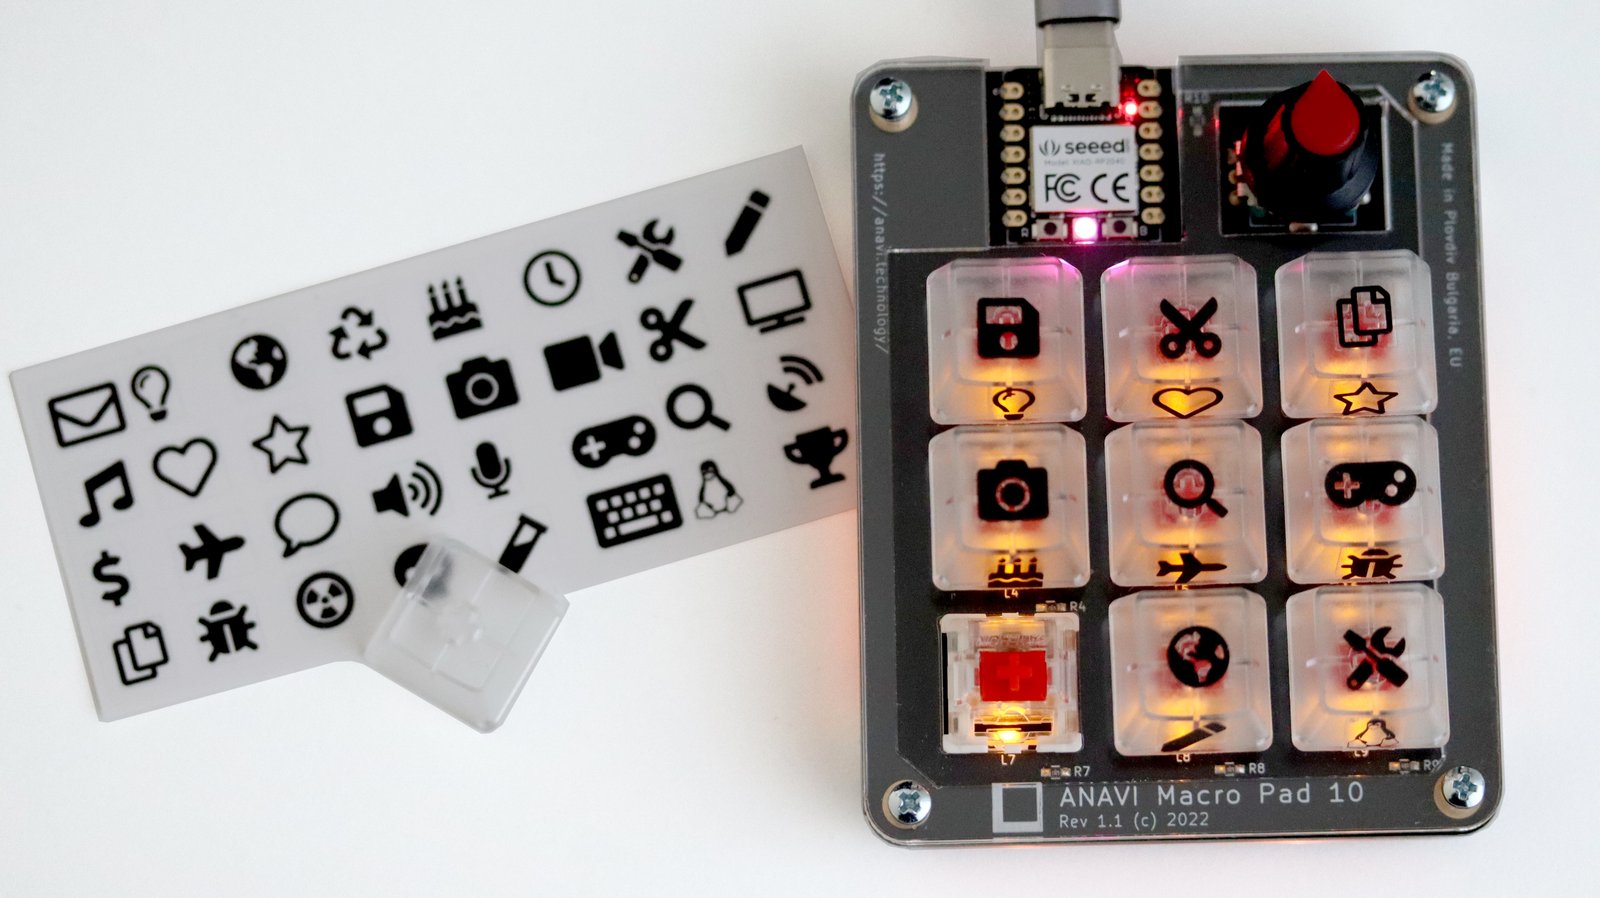 ANAVI Macro Pad 10 & Knobs are Funded!